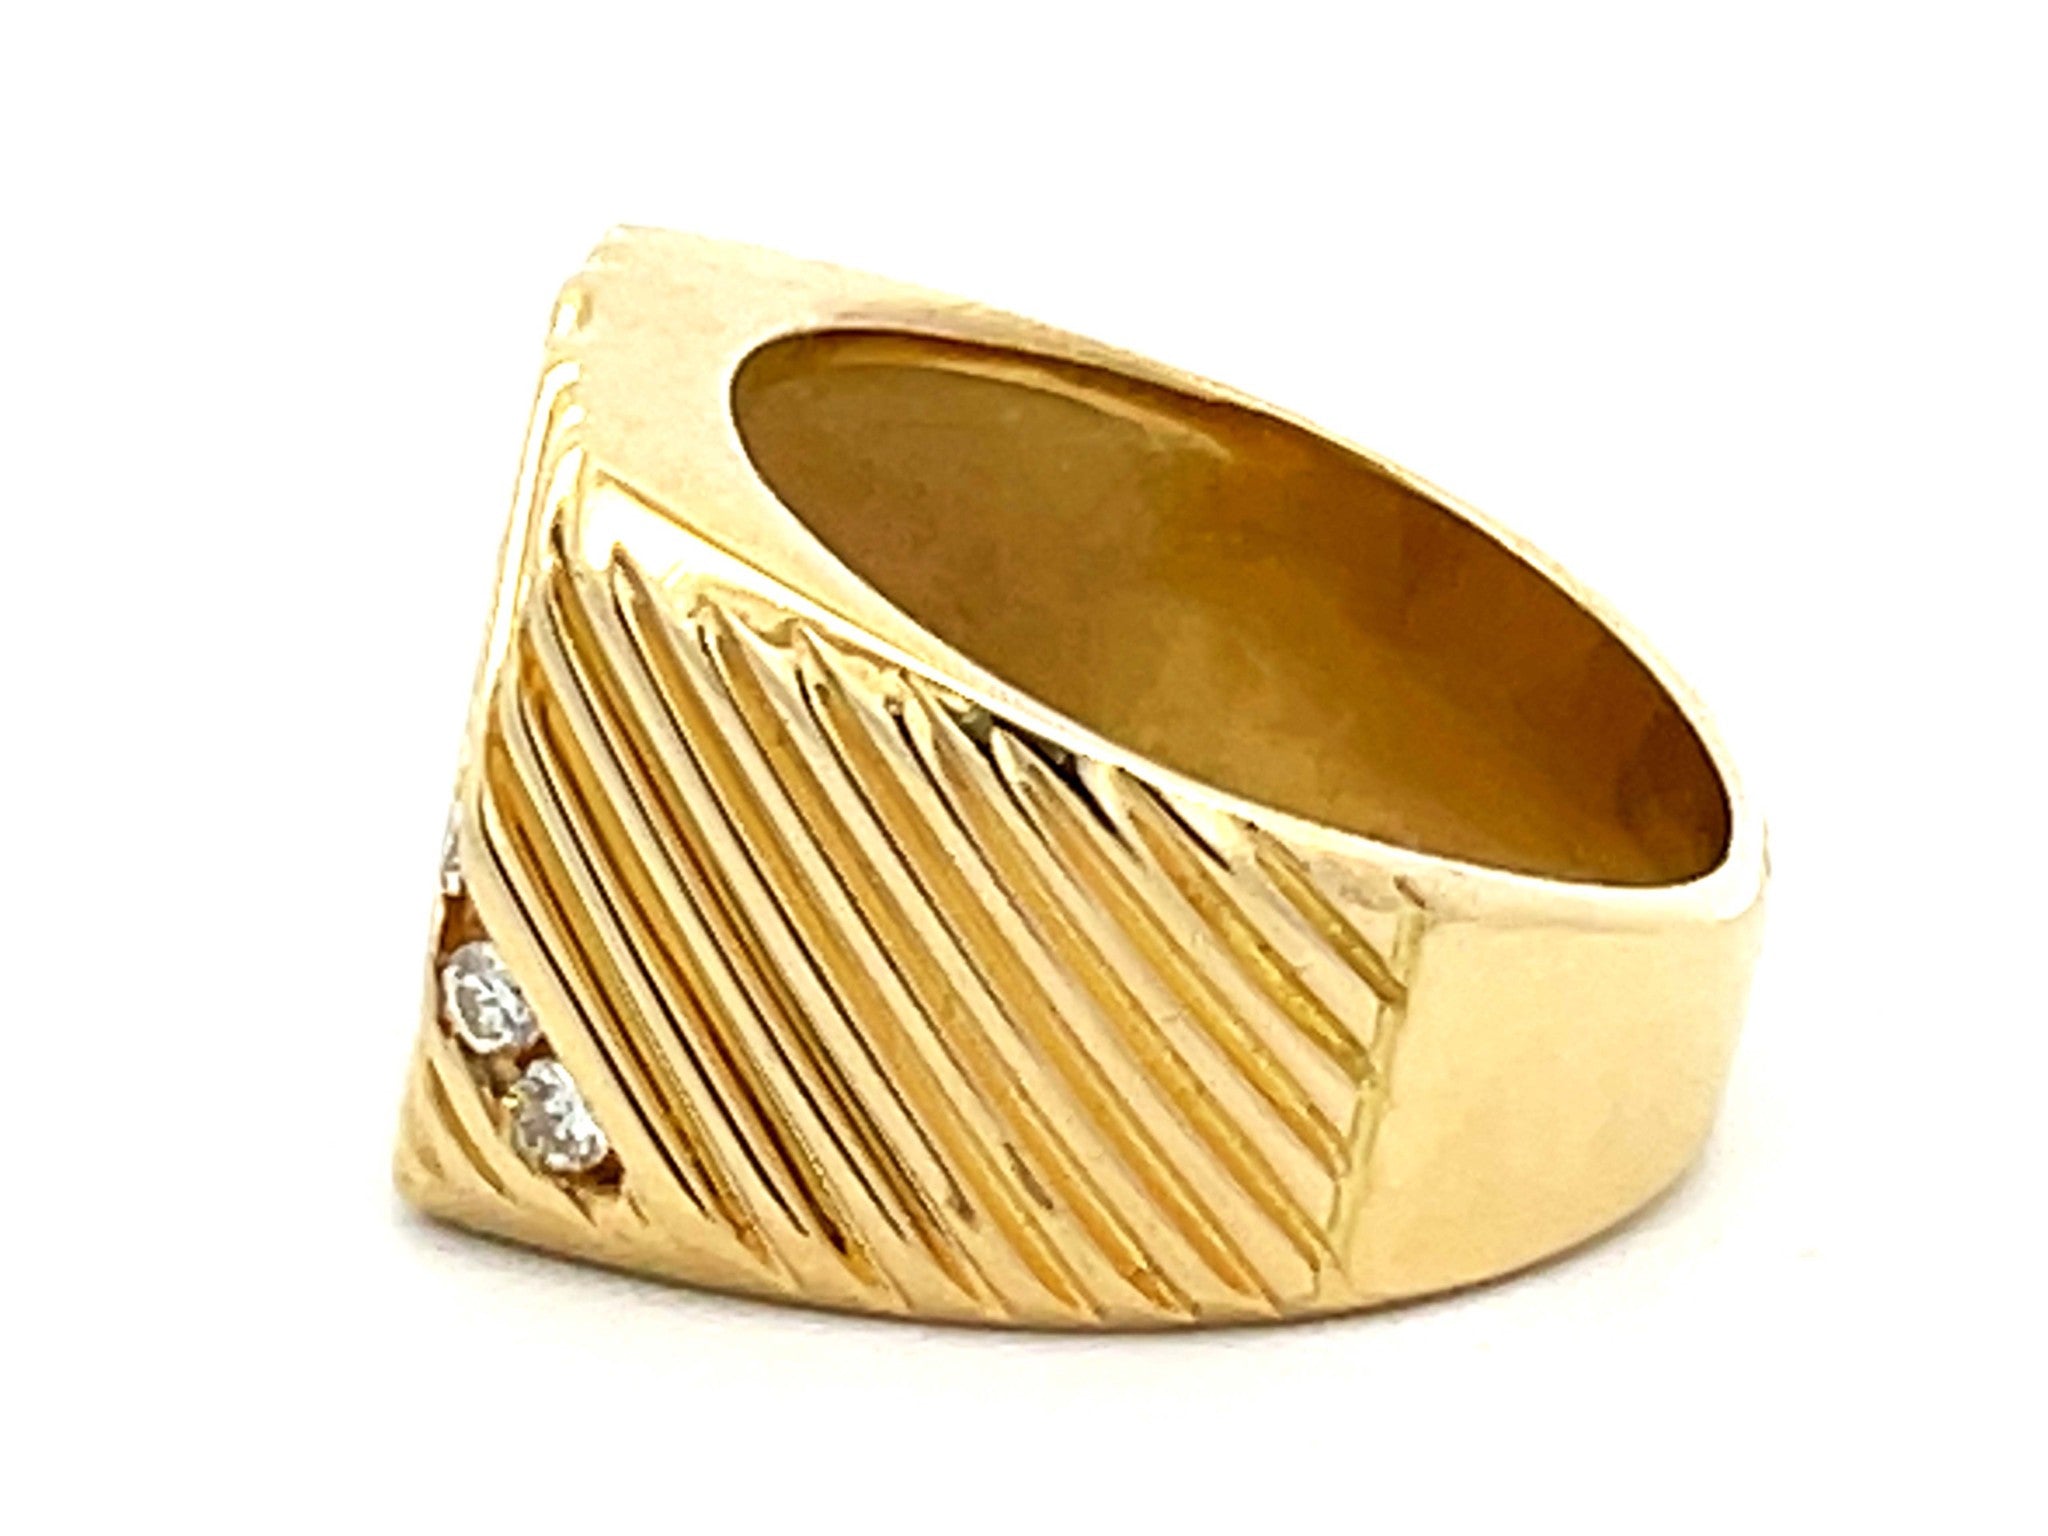 Mens Fluted Design and Diagonal Diamond Row Pinky Ring in 18k Yellow Gold